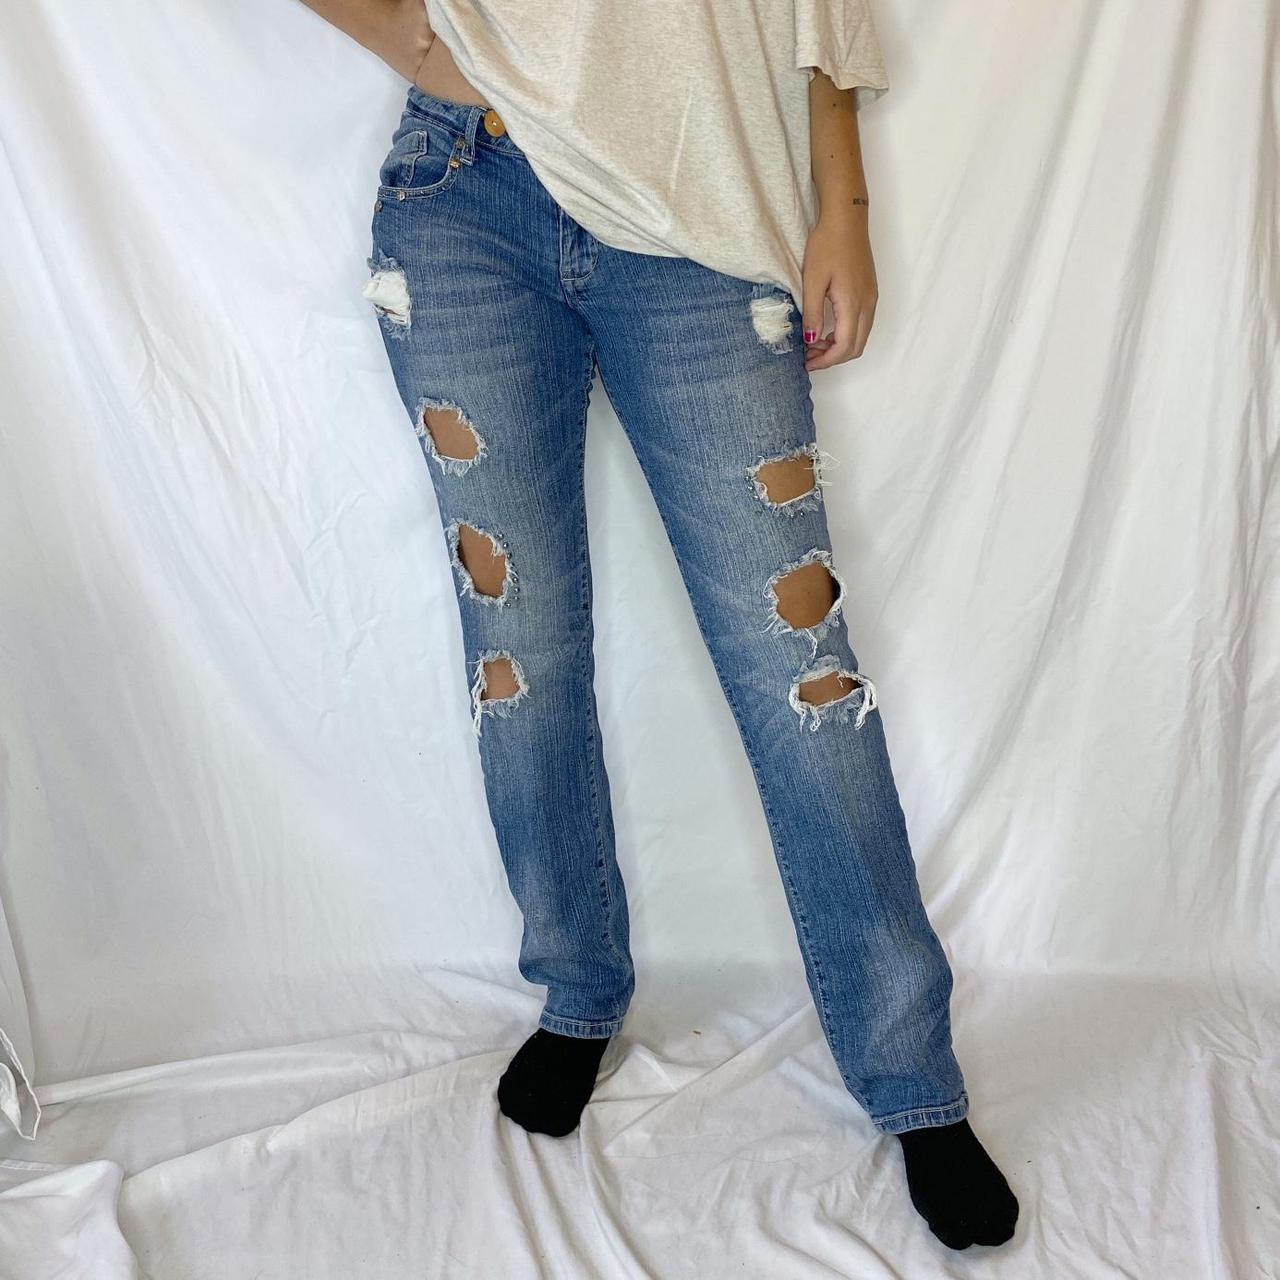 Product Image 1 - cut out low rise jeans

these